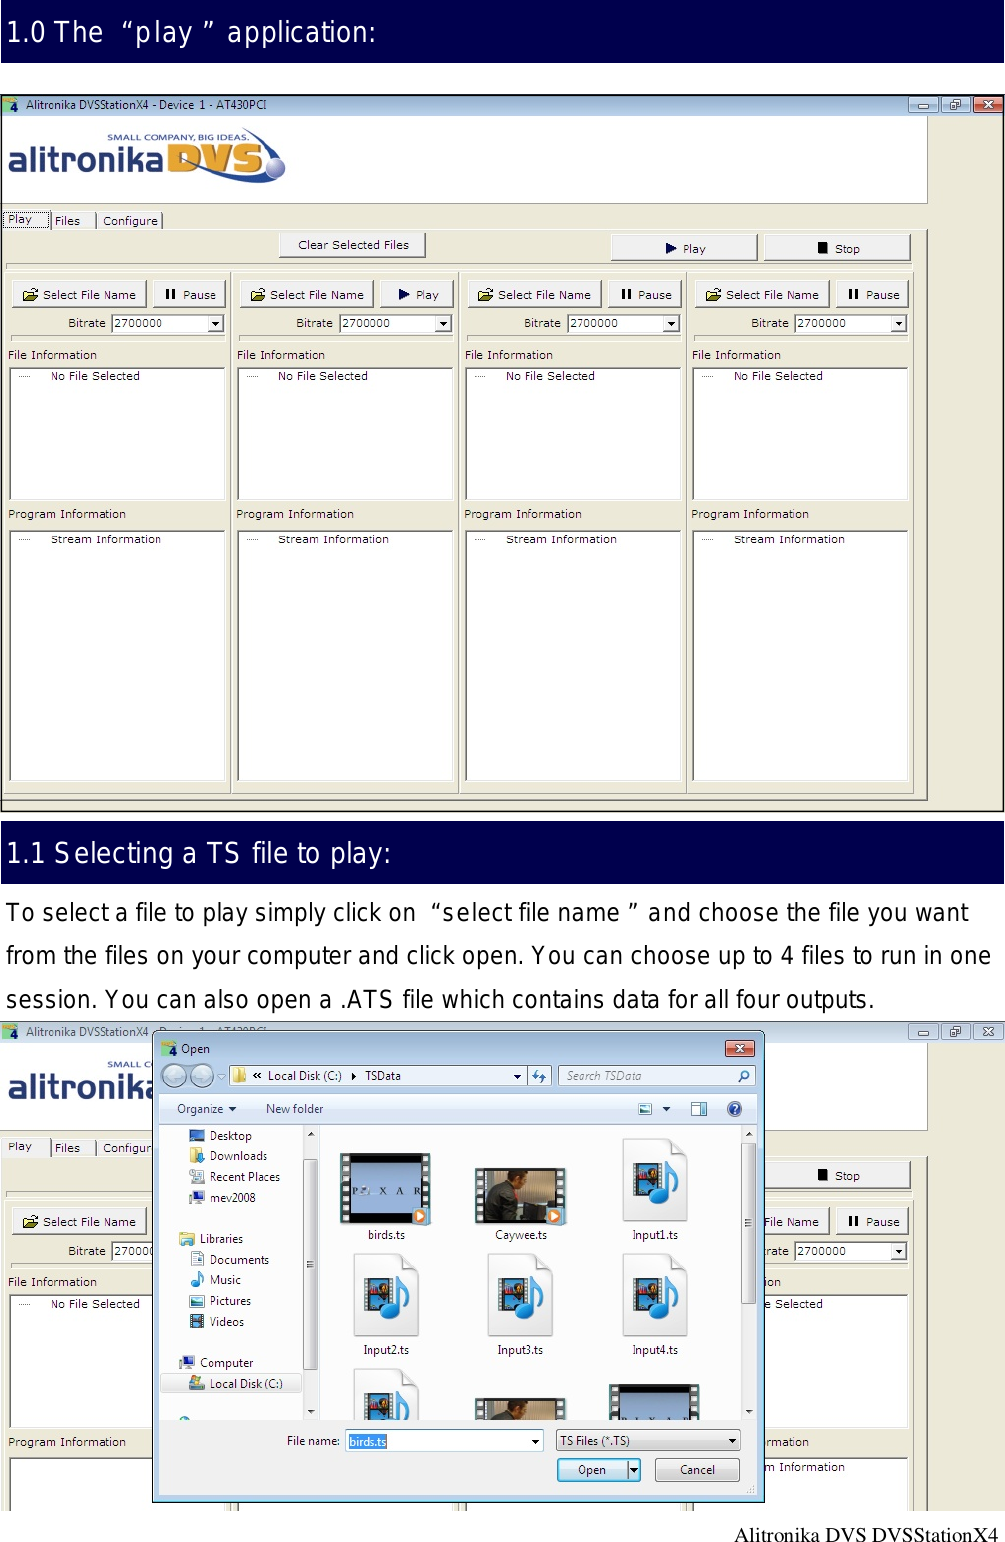 Alitronika DVS DVSStationX4                                                                                                   1.0 The “play” application: 1.1 Selecting a TS file to play: To select a file to play simply click on “select file name” and choose the file you want from the files on your computer and click open. You can choose up to 4 files to run in one session. You can also open a .ATS file which contains data for all four outputs. 